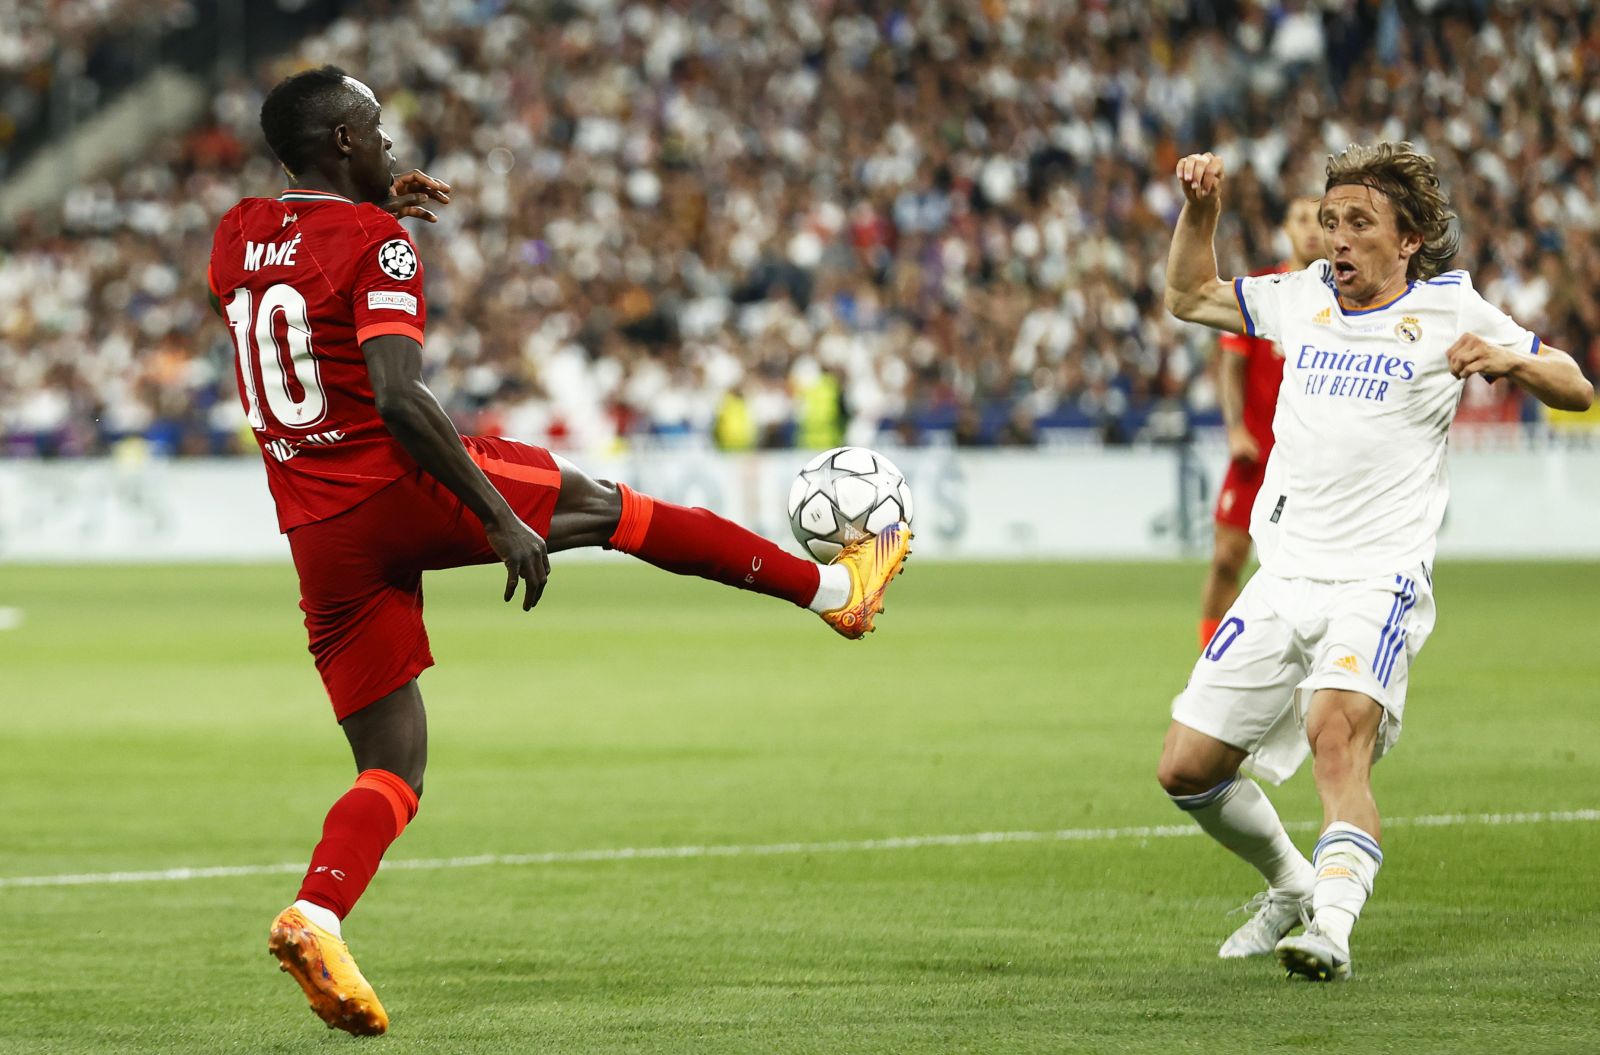 epa09983320 Luka Modric (R) of Real Madrid in action against Sadio Mane (L) of Liverpool during the UEFA Champions League final between Liverpool FC and Real Madrid at Stade de France in Saint-Denis, near Paris, France, 28 May 2022.  EPA/YOAN VALAT